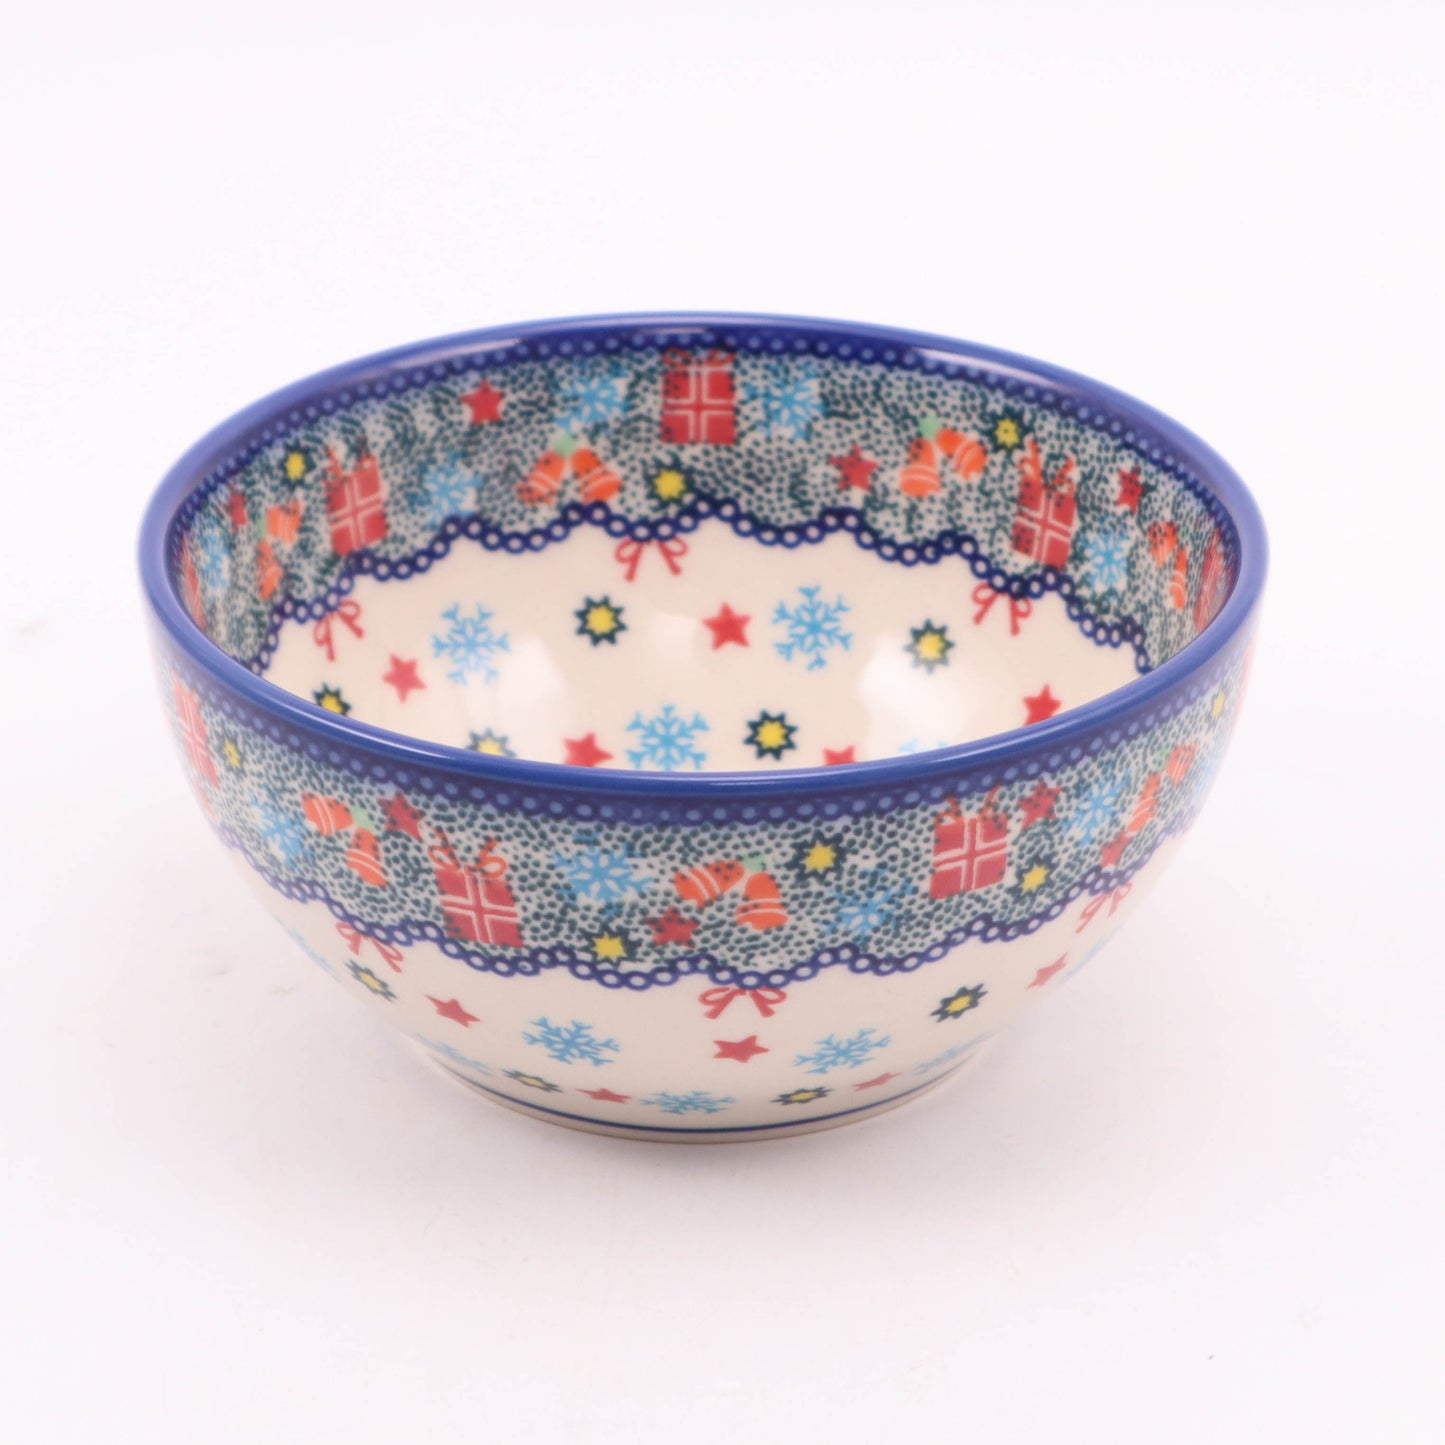 6" Cereal Bowl. Pattern: Gifts Flakes